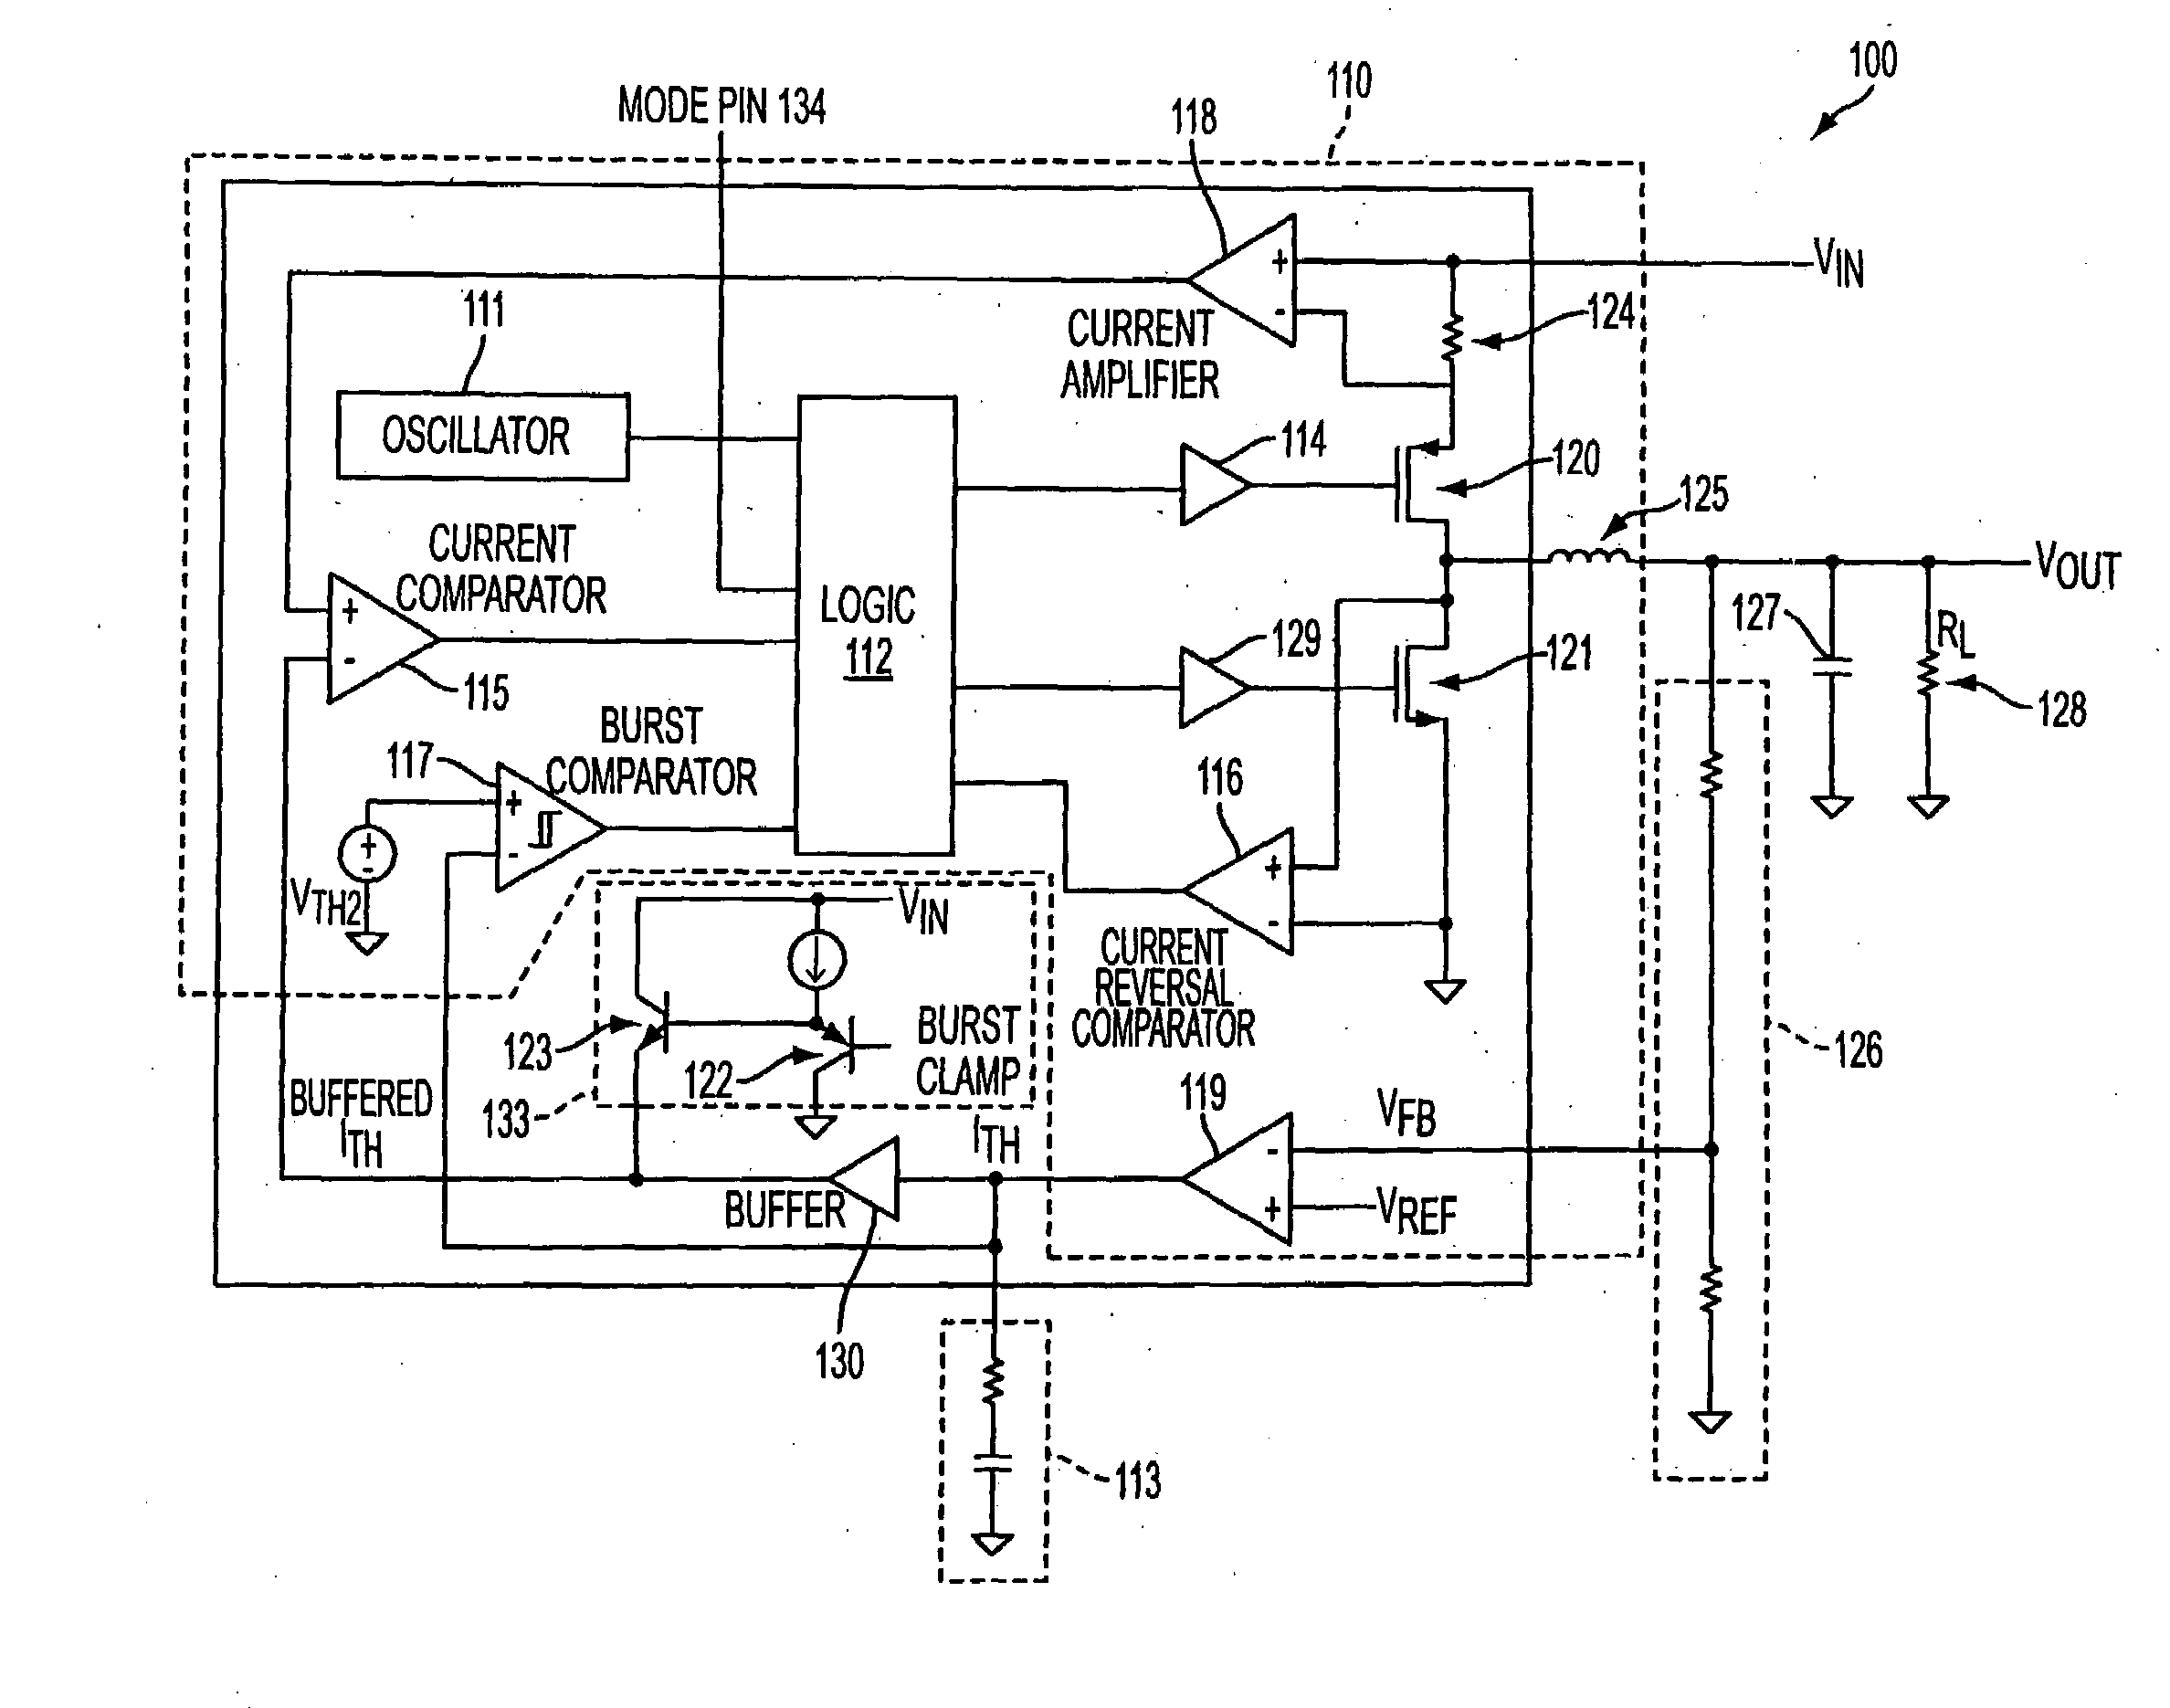 Circuits and methods for adjustable peak inductor current and hysteresis for burst mode in switching regulators